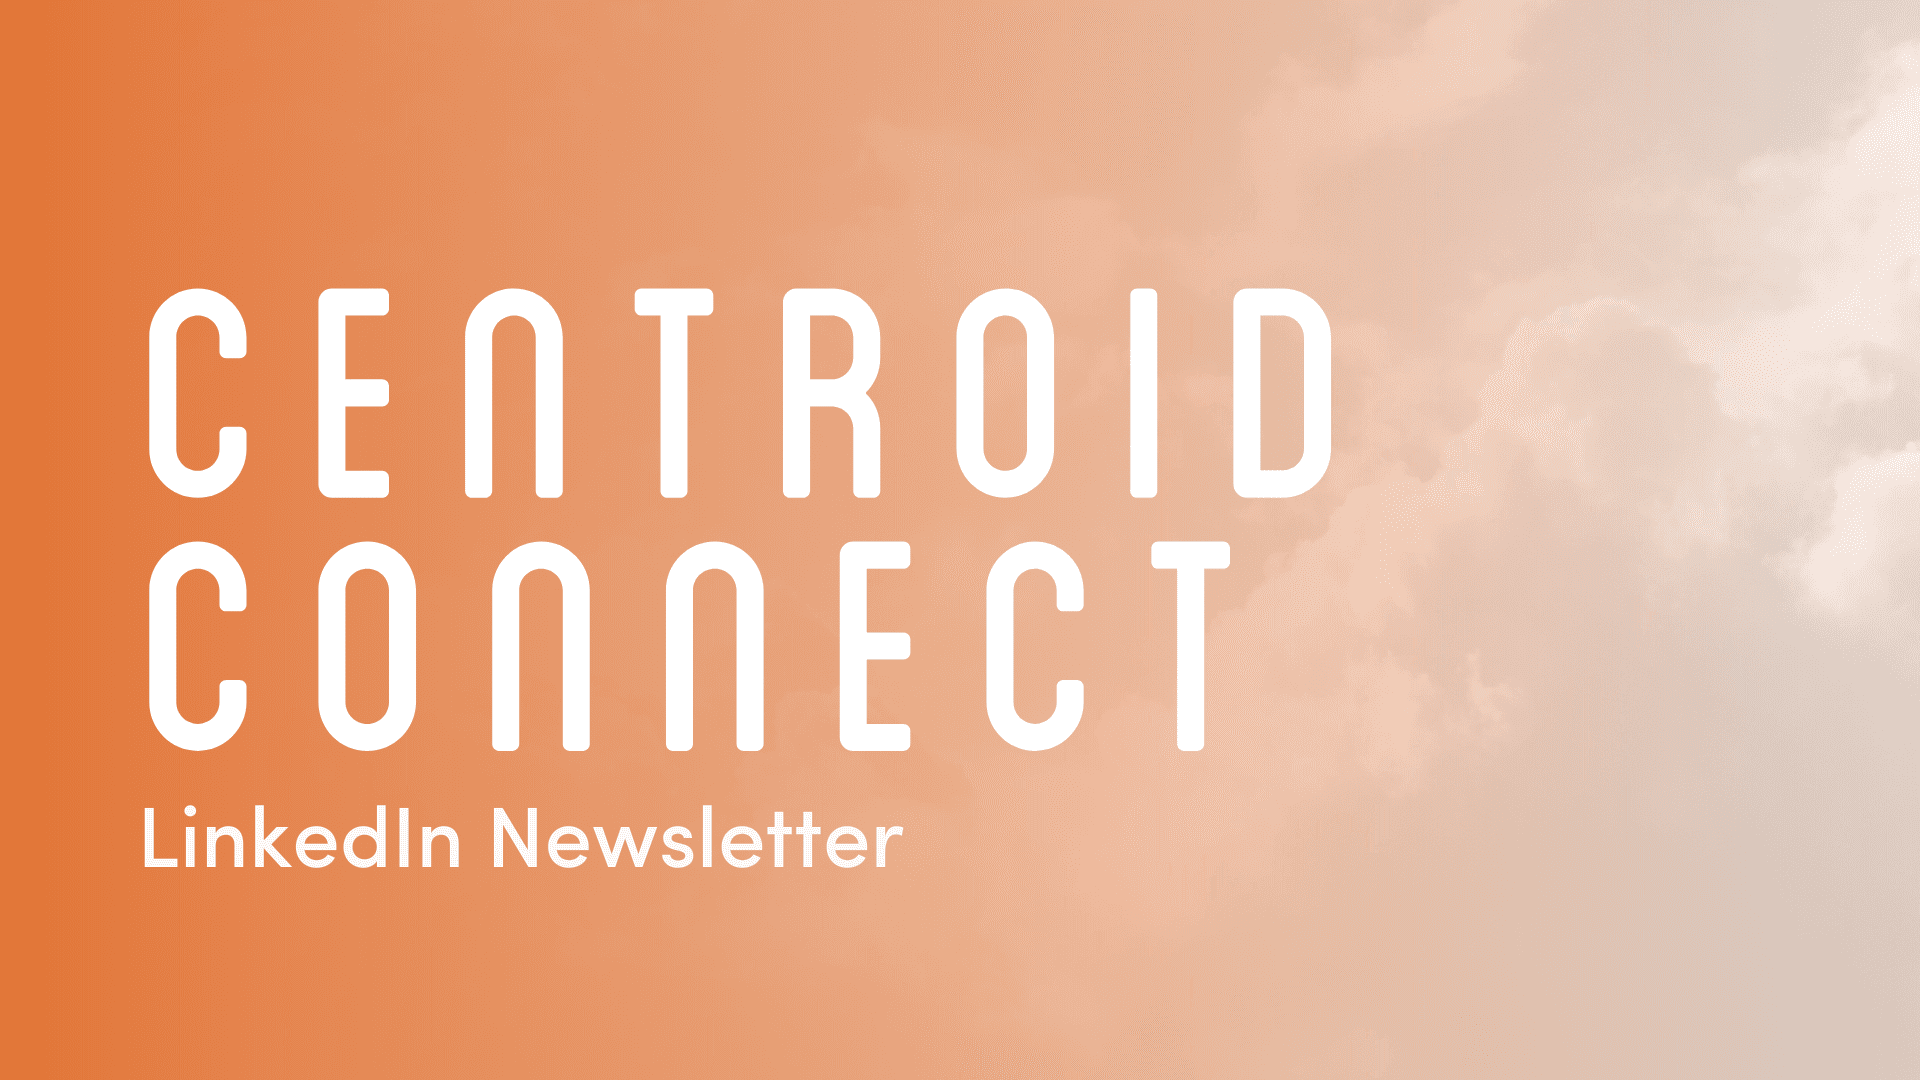 Resources_Centroid Connect LinkedIn Newsletter